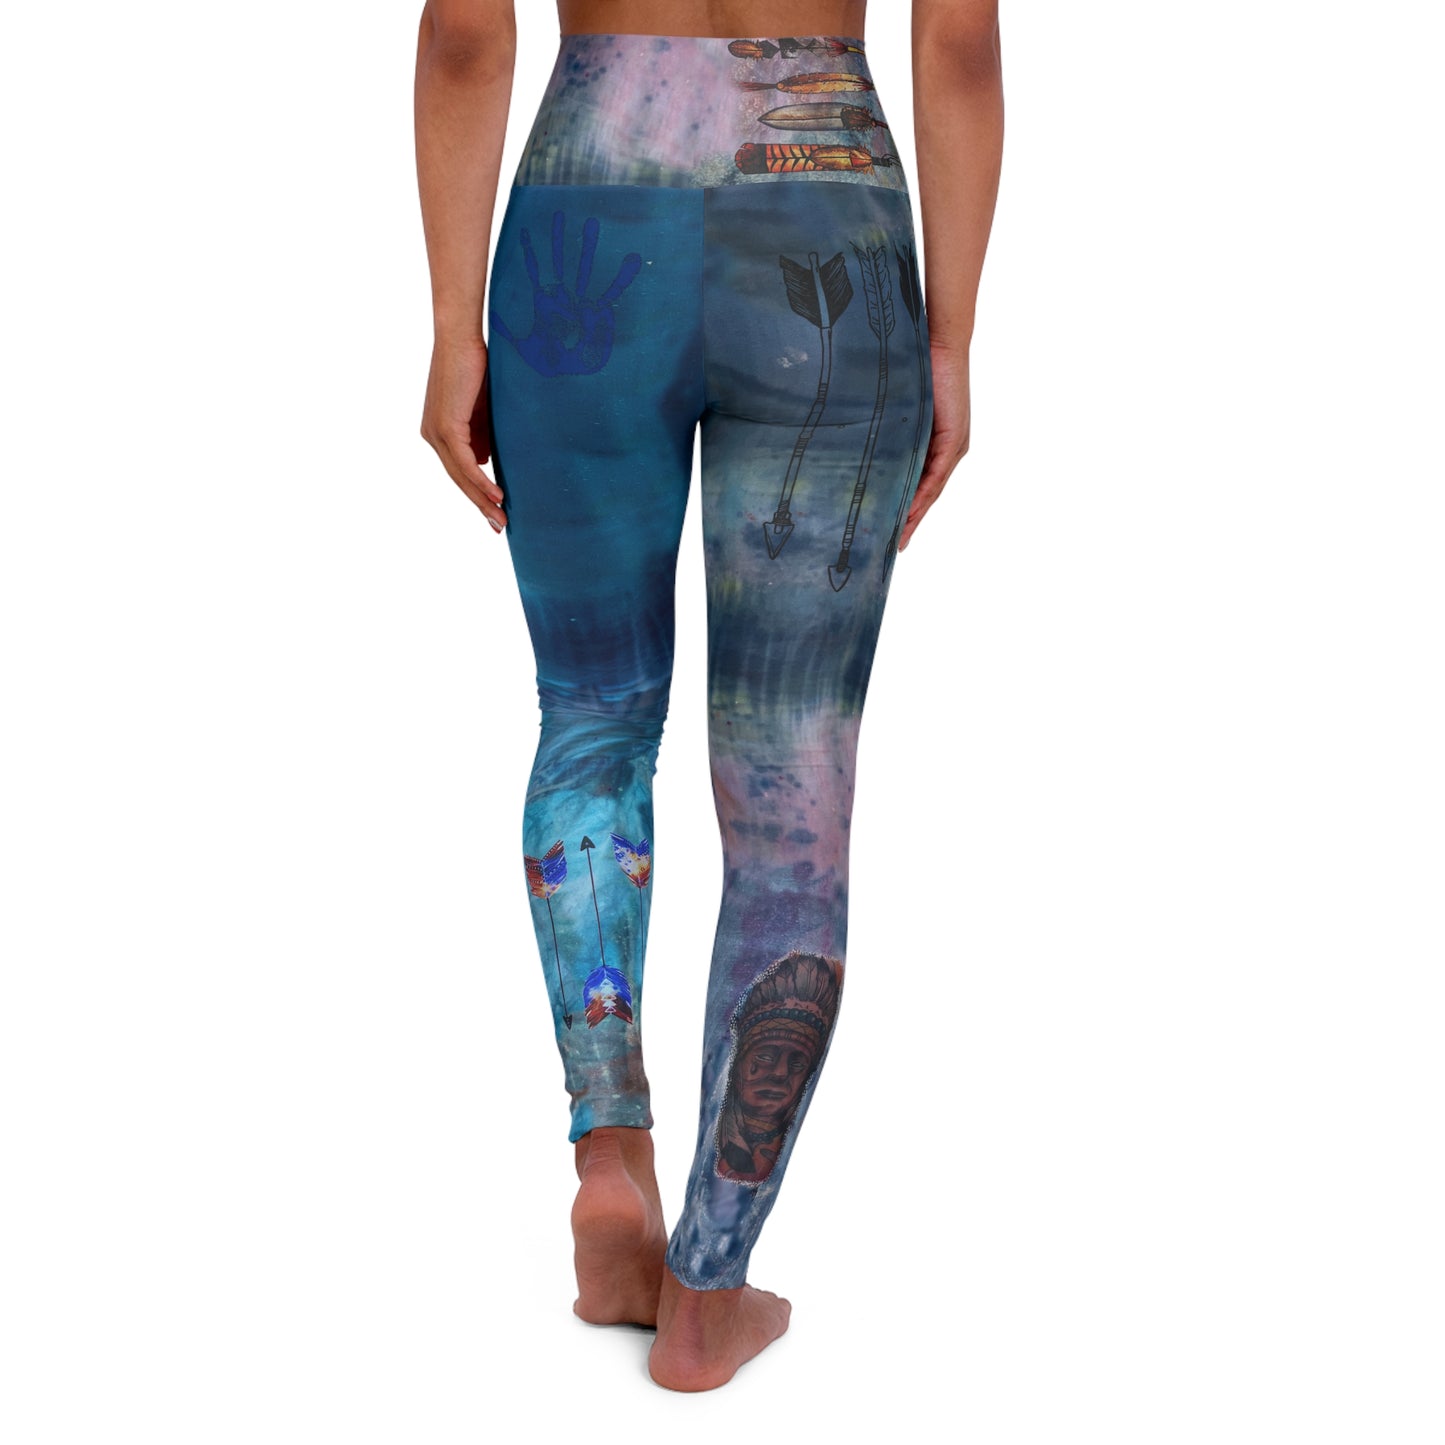 Founding Feathers High Waisted Leggings